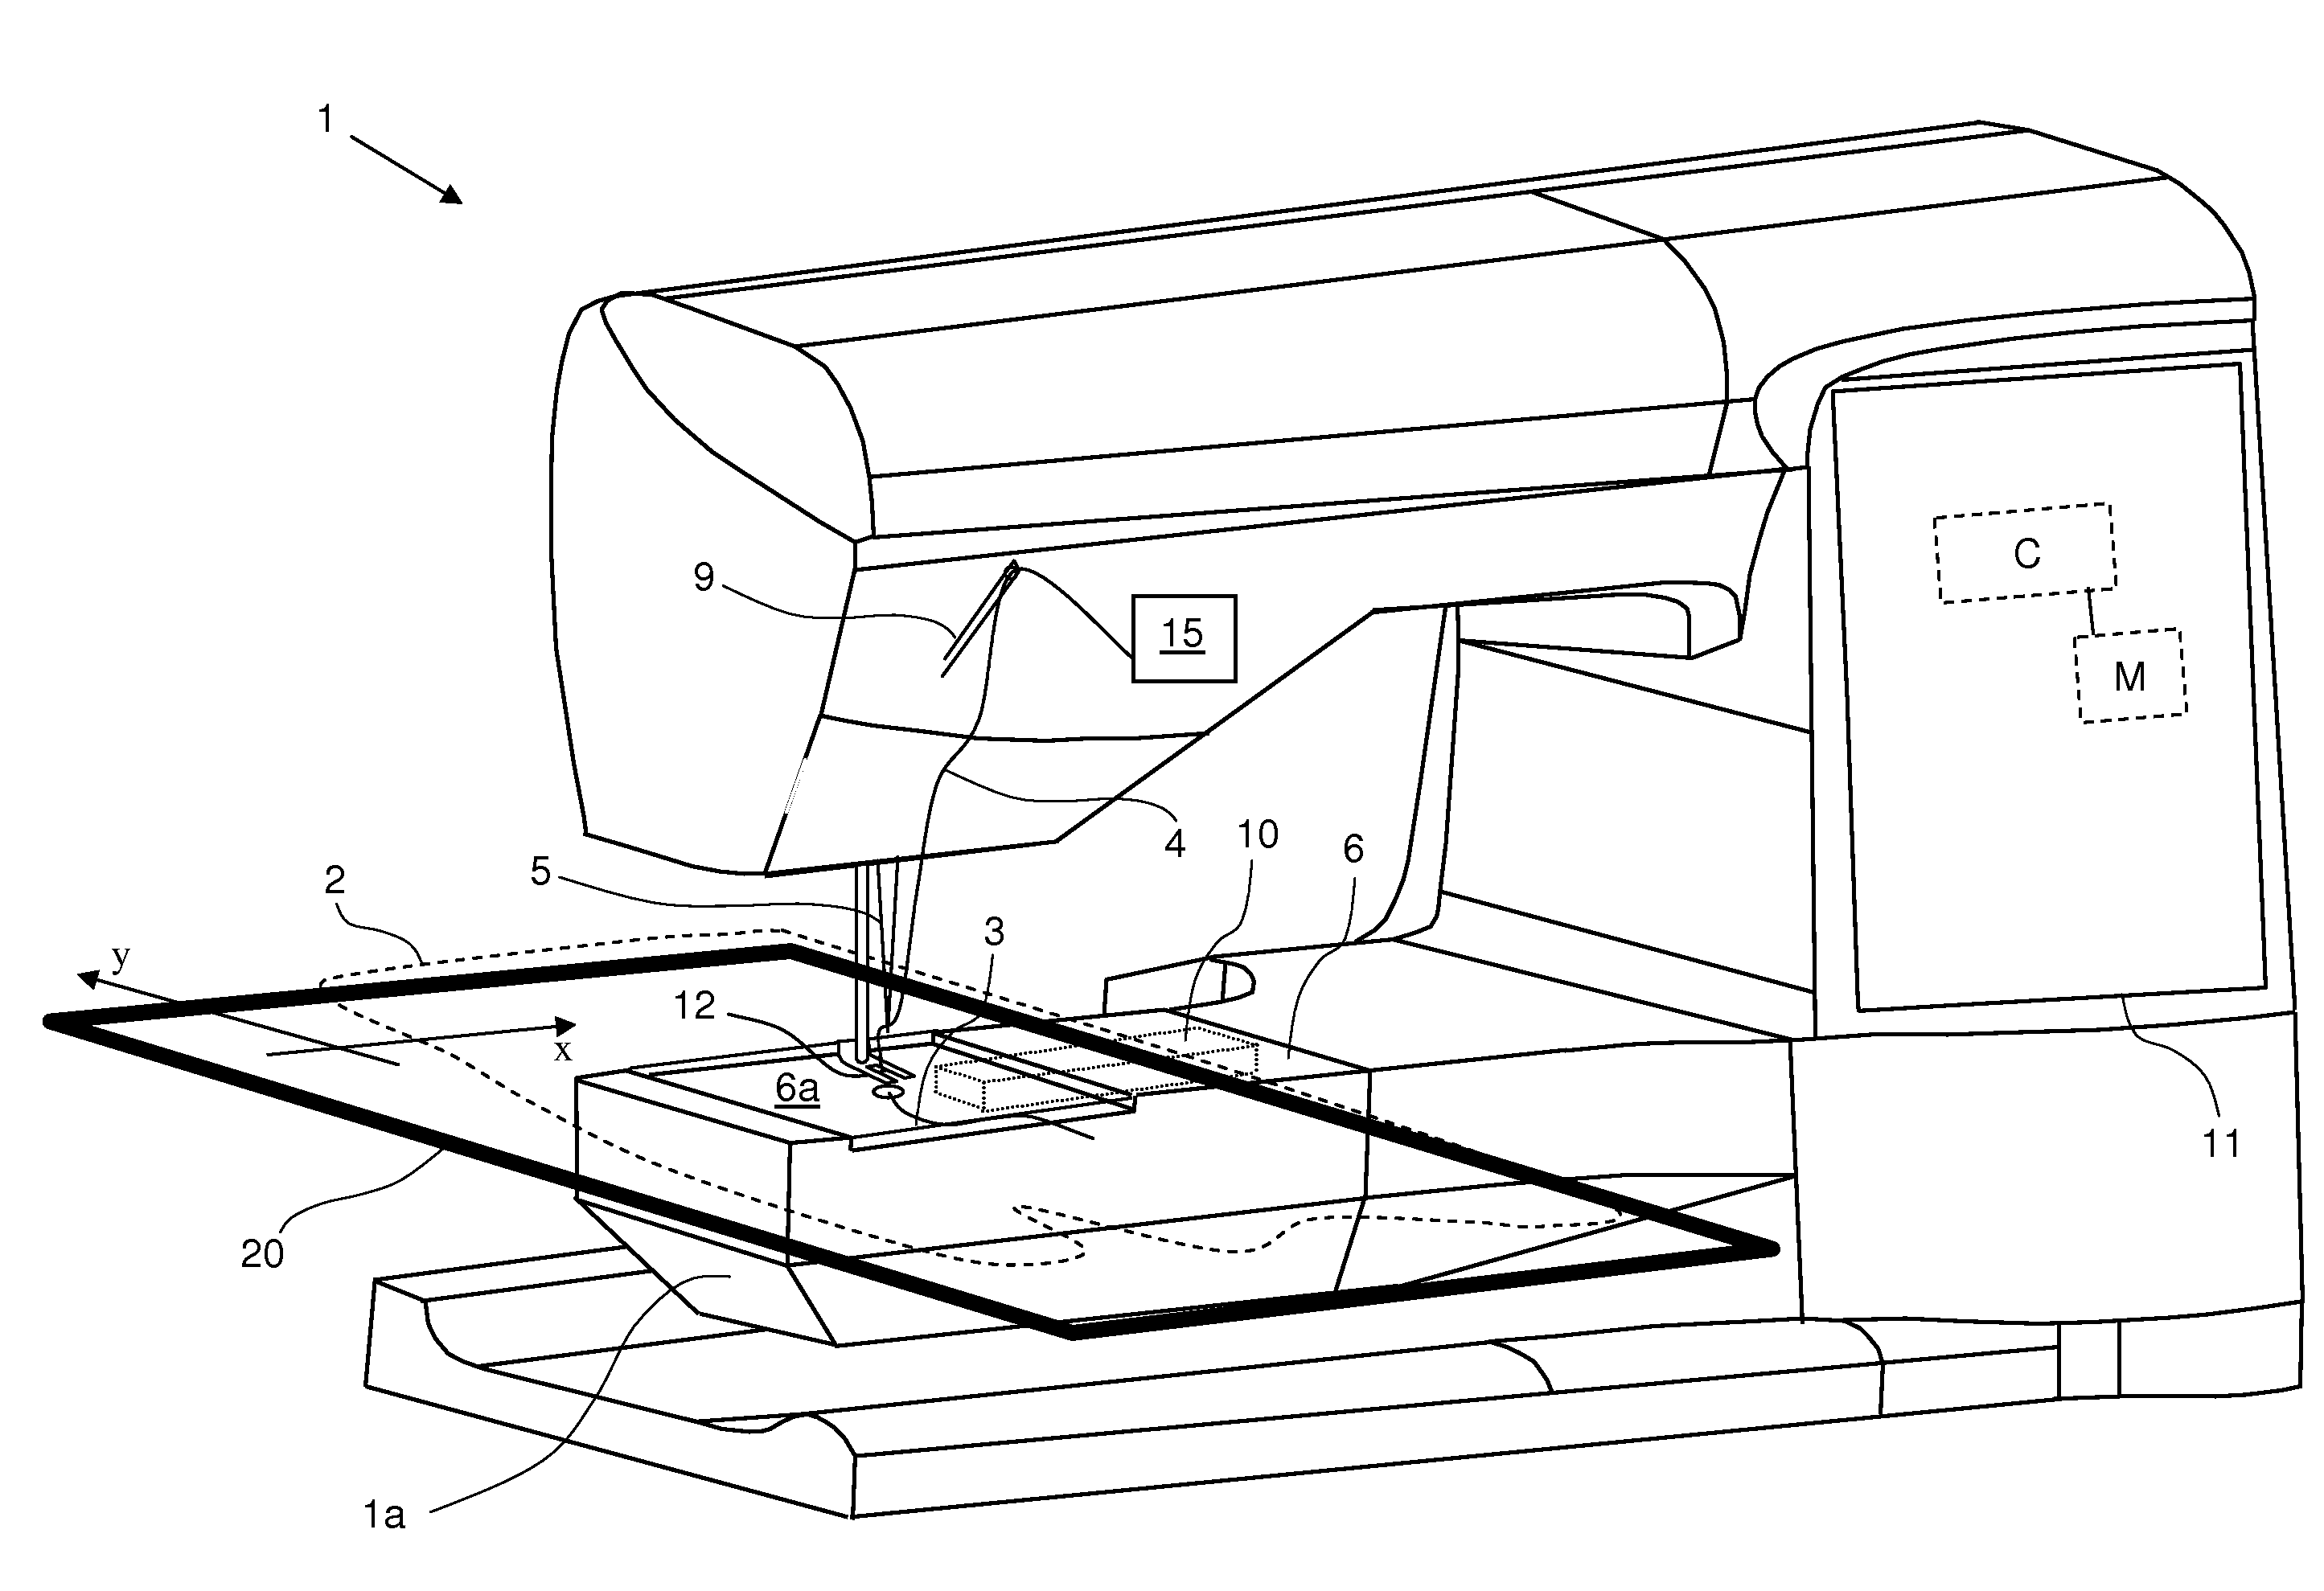 Thread cut with variable thread consumption in a sewing machine